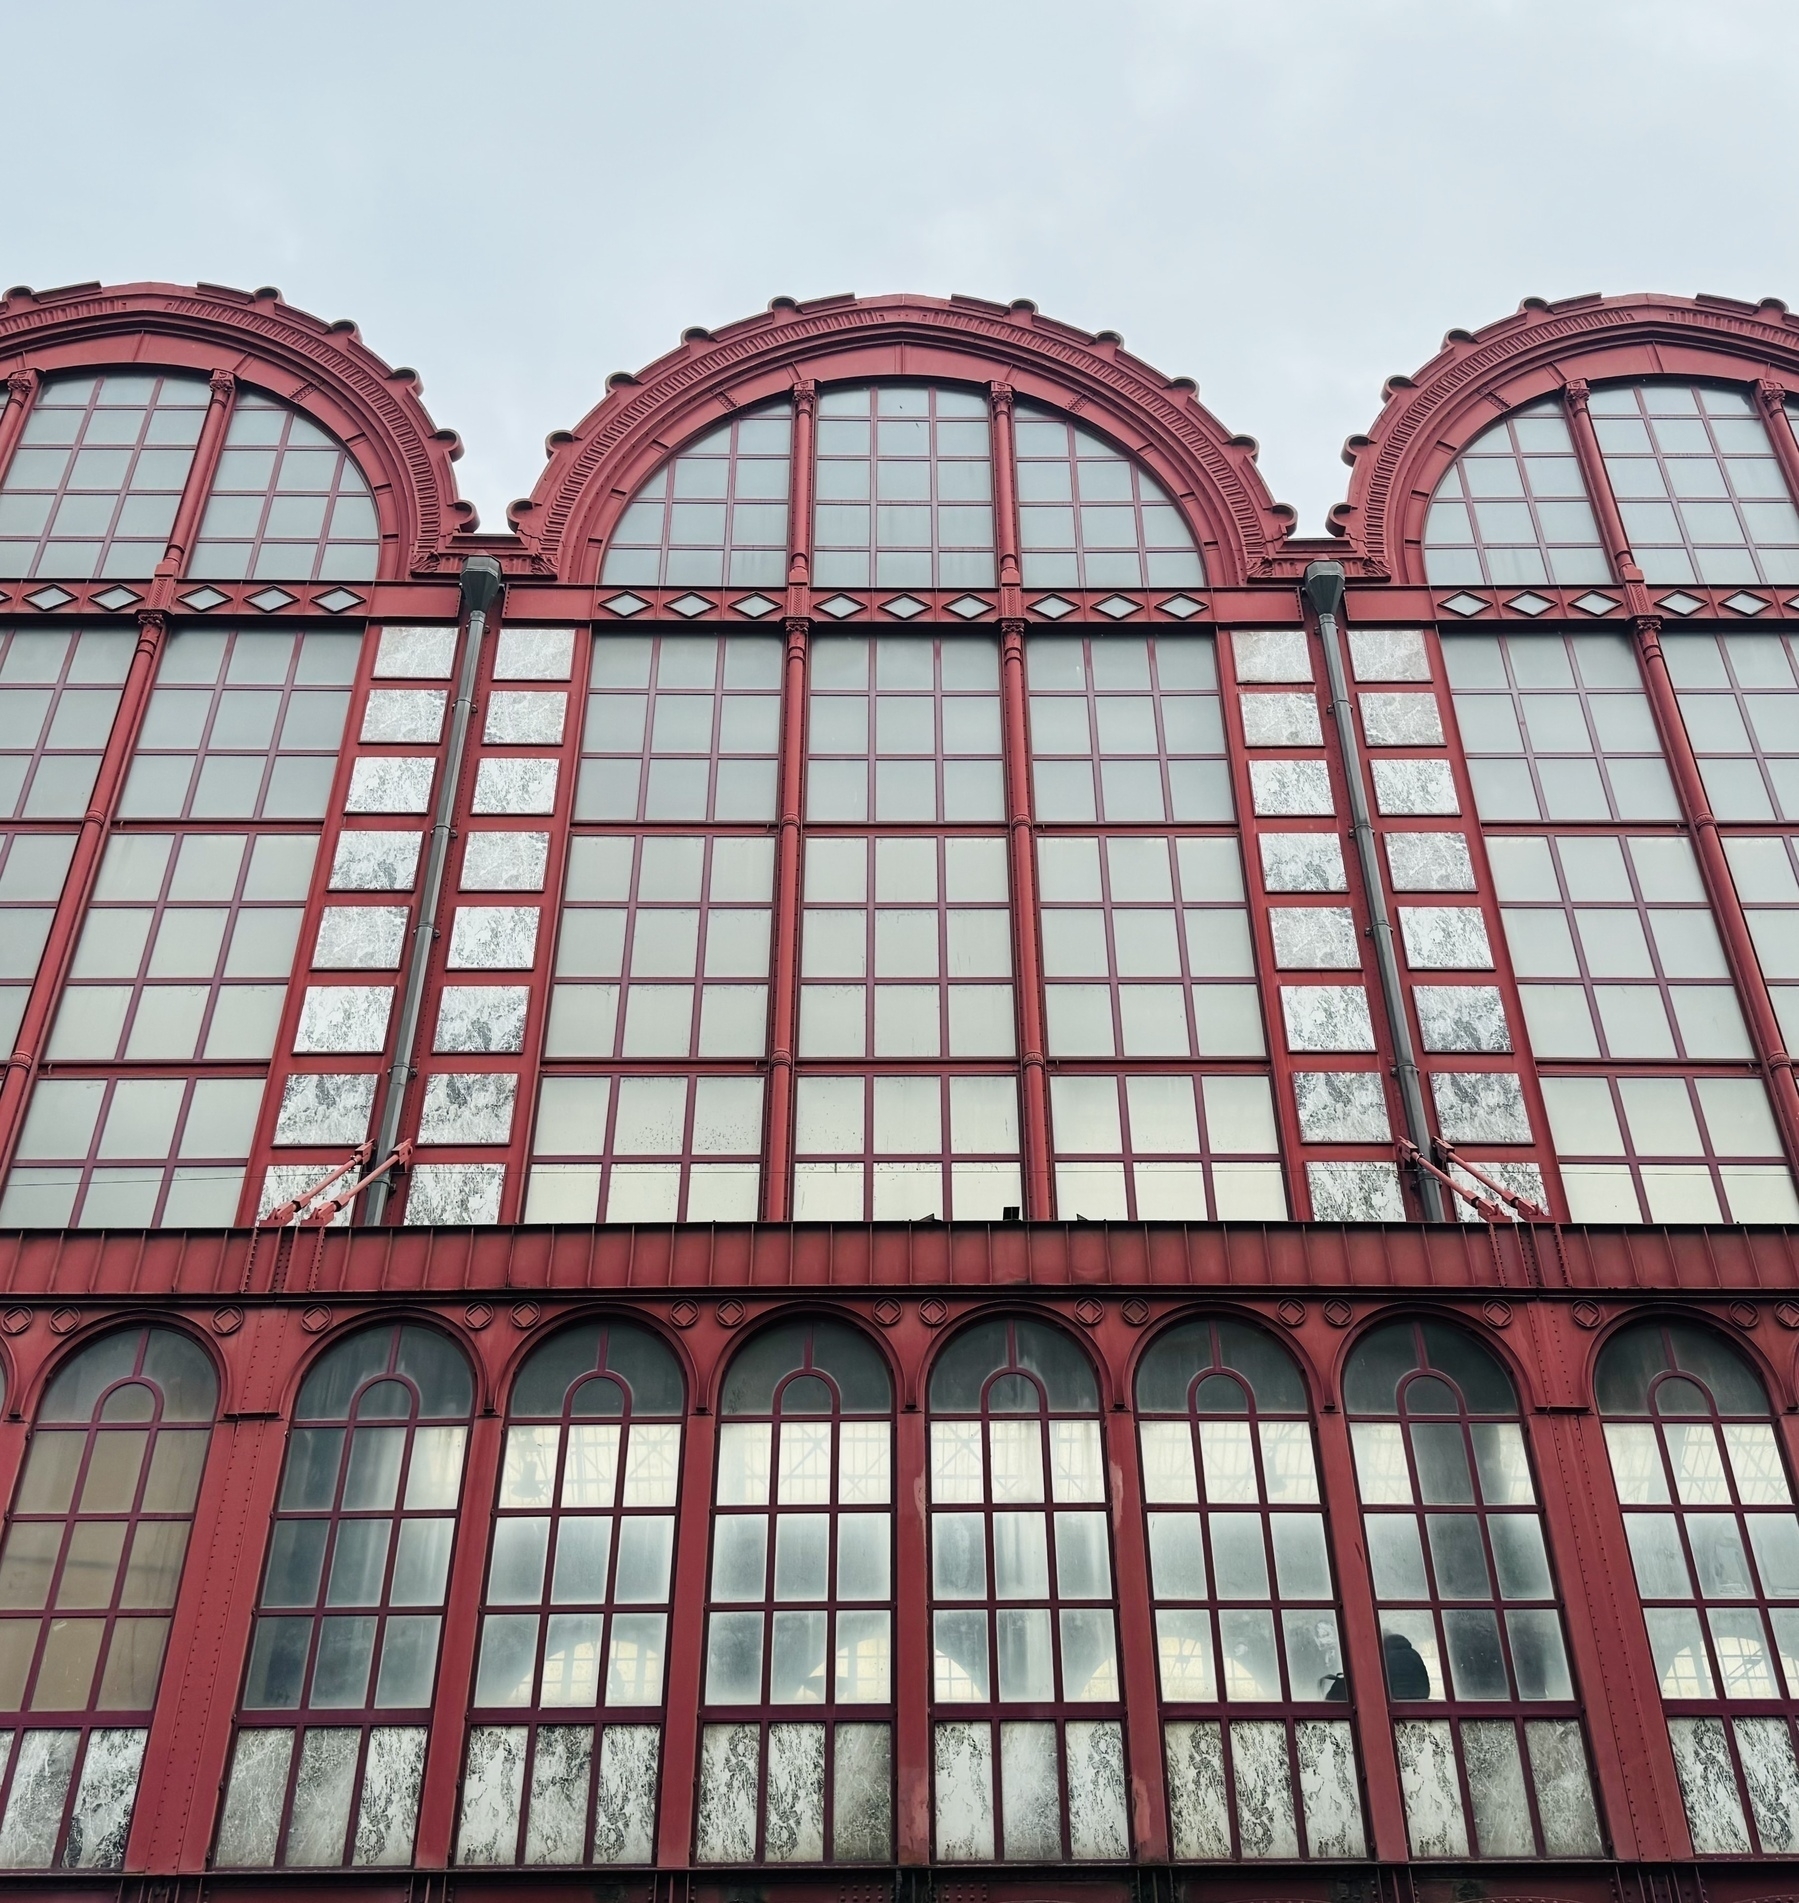 Red metalwork arching in to the sky holding glass panes, at Antwerp train station.